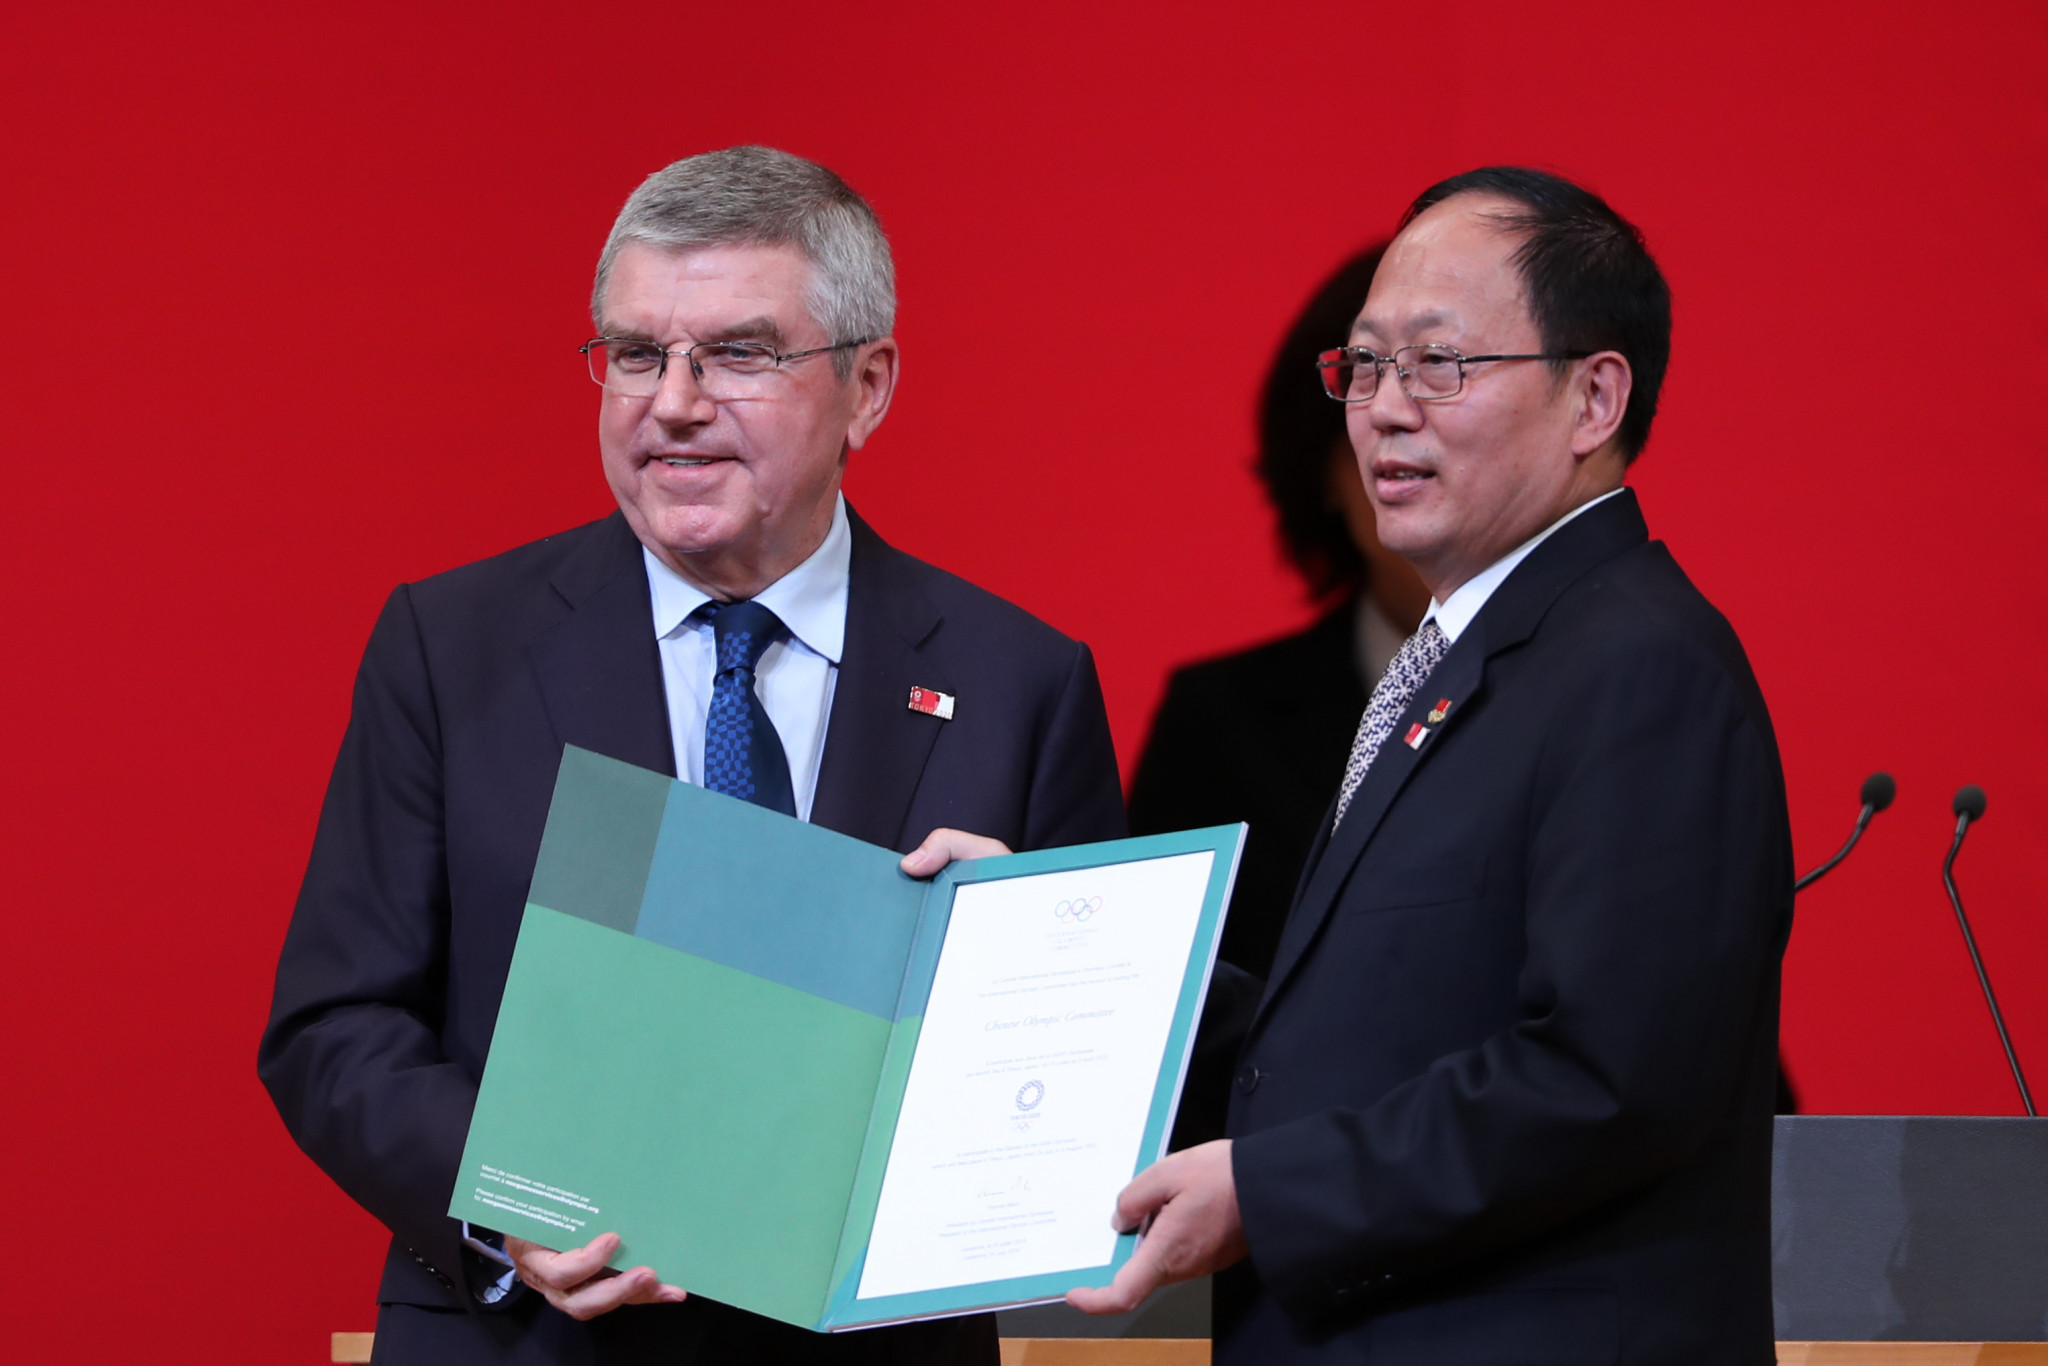 Gou Zhongwen, pictured right alongside IOC President Thomas Bach, has stood down as Chinese Olympic Committee President, being replaced by Gao Zhidan ©Getty Images